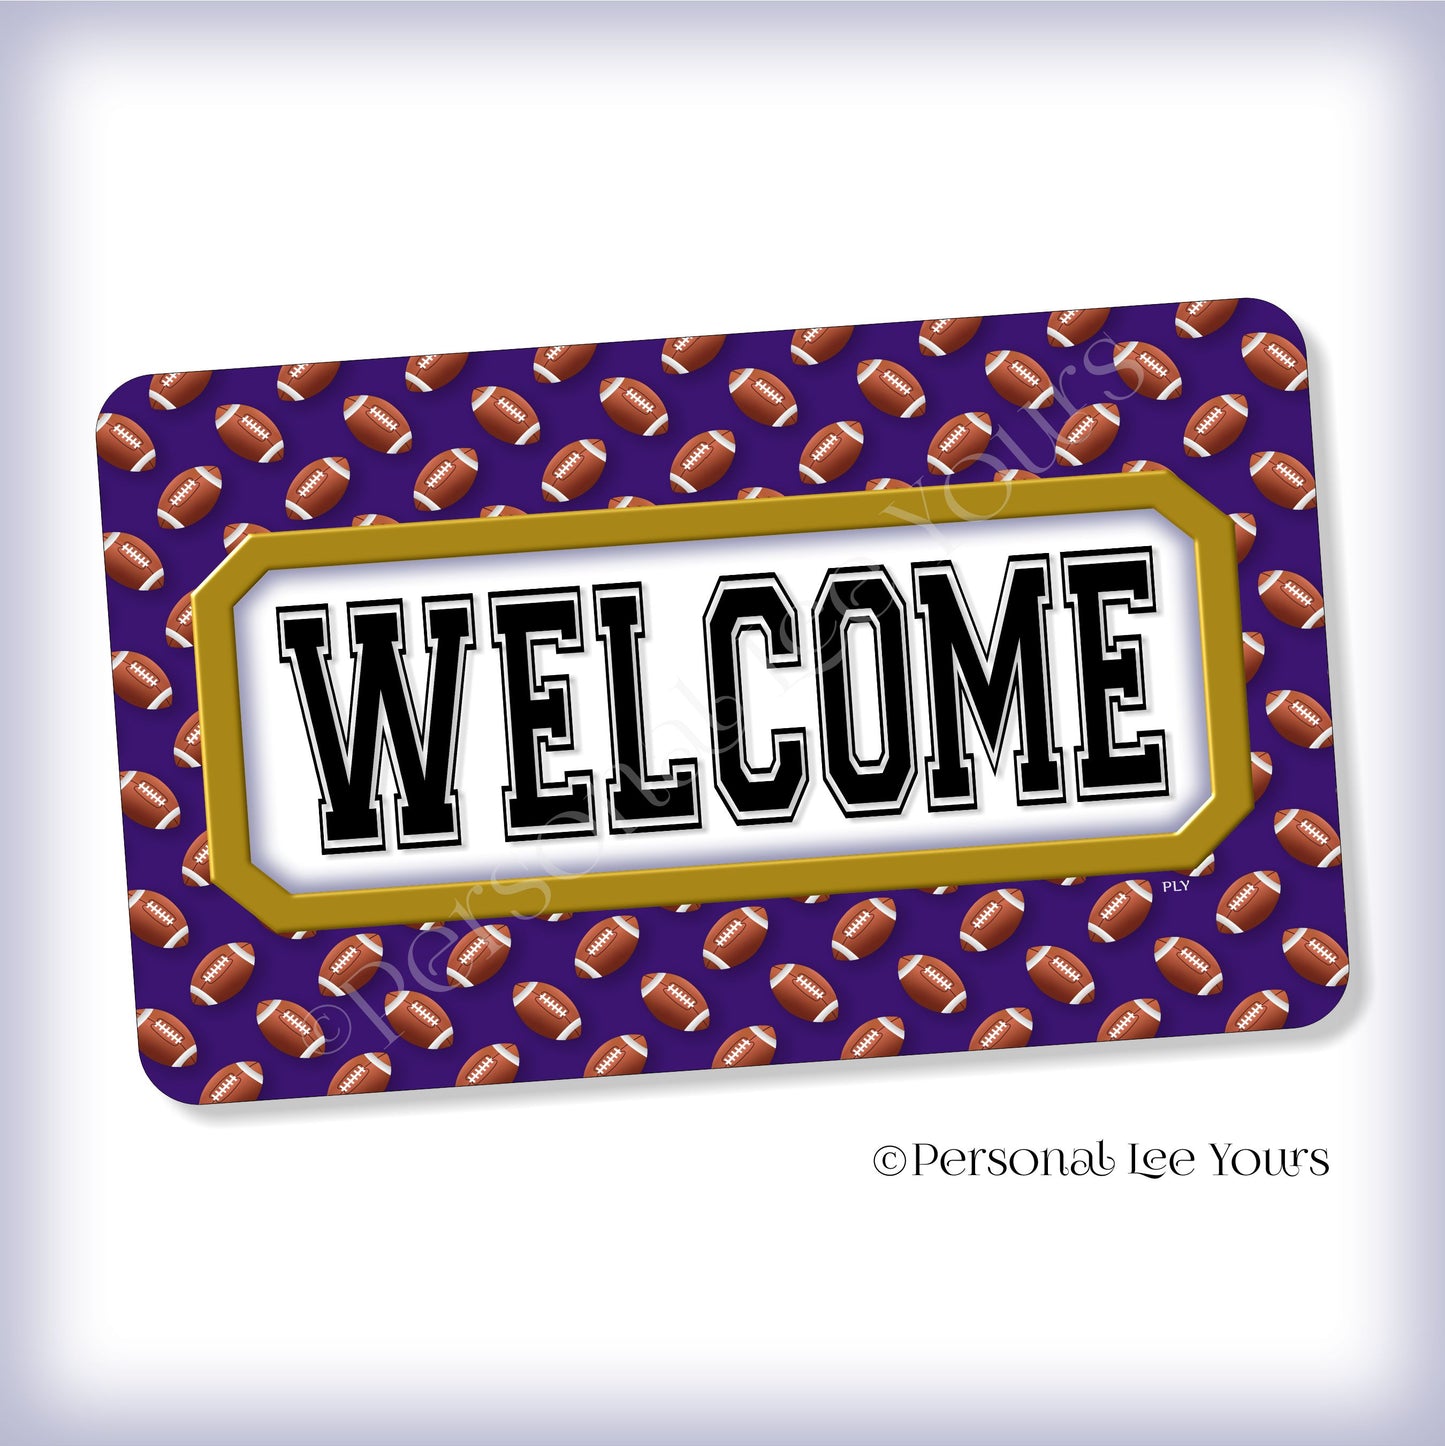 Simple Welcome Wreath Sign * Football, Baltimore Purple and Gold * Horizontal * Lightweight Metal